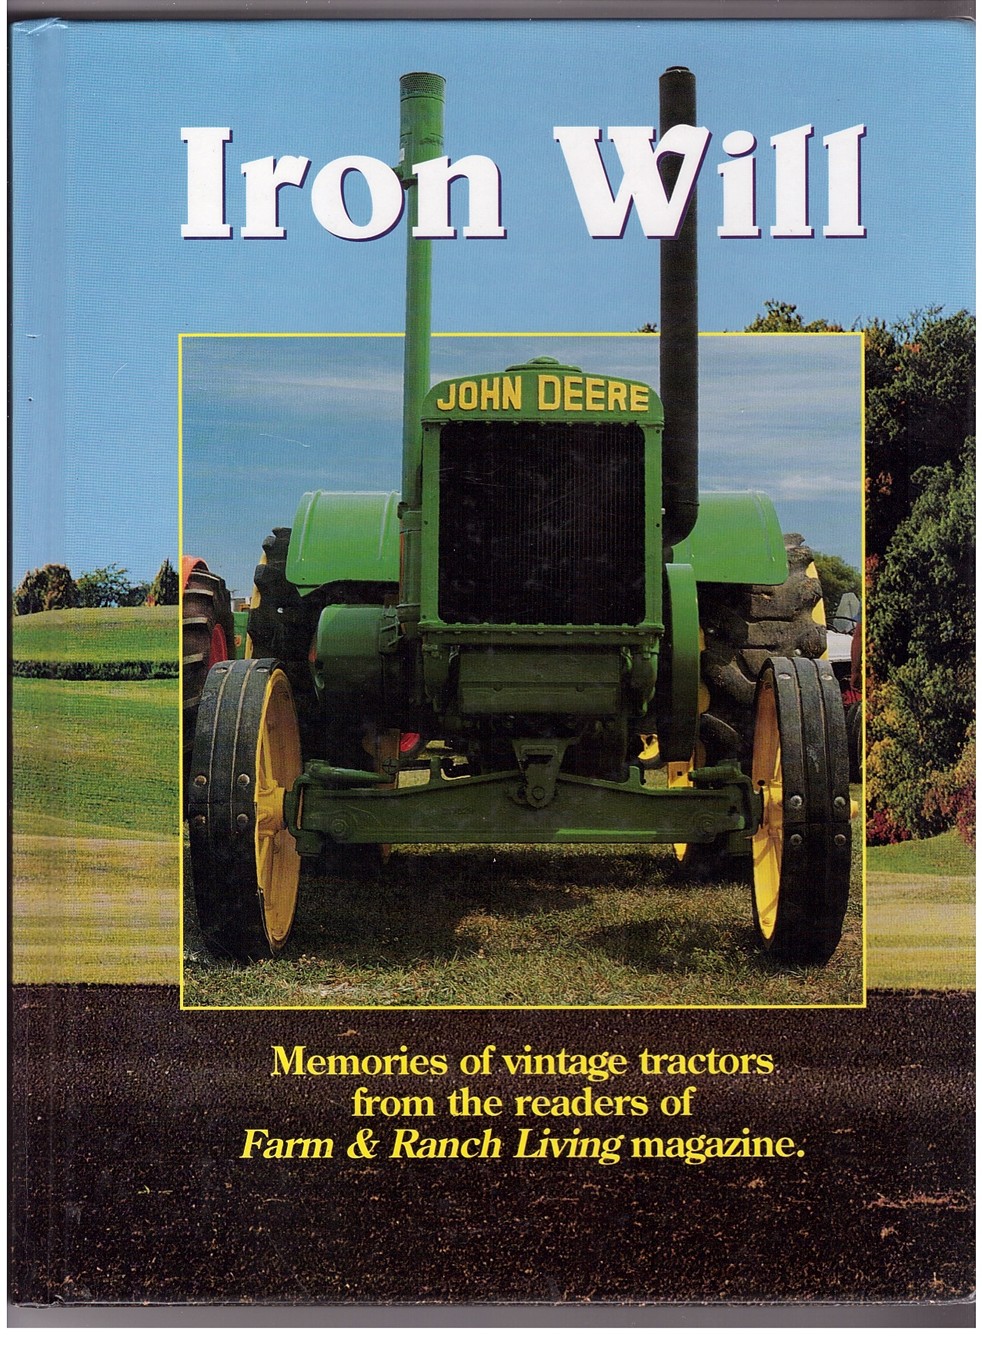 PABST, NICK &  ROY REIMAN & REIMAN PUBLICATIONS - Iron Will Memories of Vintage Tractors from the Readers of Farm & Ranch Living Magazine